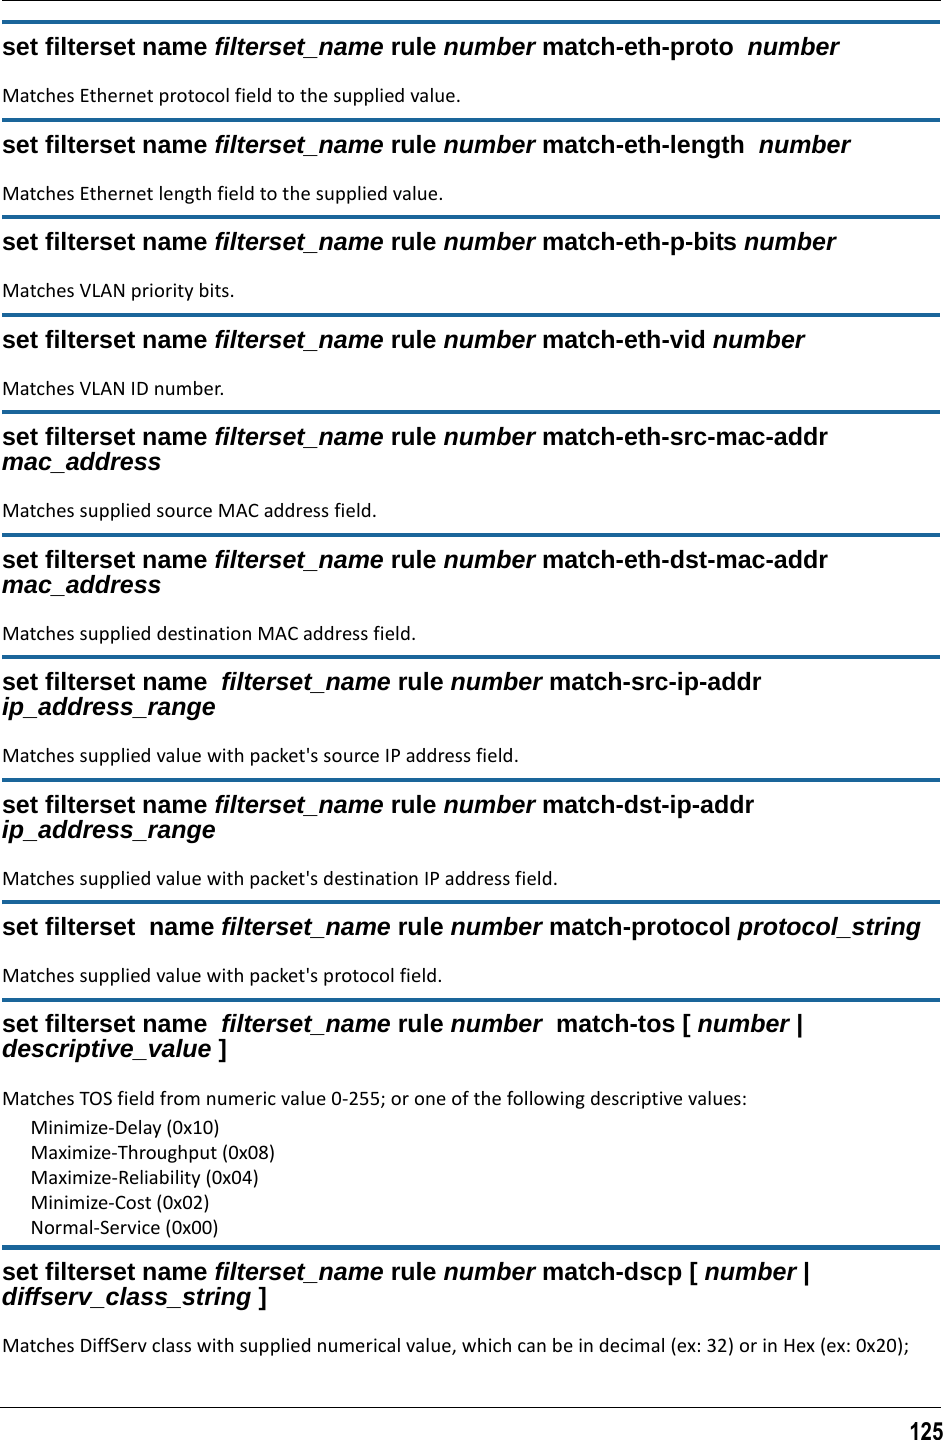 125set filterset name filterset_name rule number match-eth-proto  number Matches Ethernet protocol field to the supplied value.set filterset name filterset_name rule number match-eth-length  numberMatches Ethernet length field to the supplied value.set filterset name filterset_name rule number match-eth-p-bits numberMatches VLAN priority bits.set filterset name filterset_name rule number match-eth-vid numberMatches VLAN ID number.set filterset name filterset_name rule number match-eth-src-mac-addr mac_addressMatches supplied source MAC address field.set filterset name filterset_name rule number match-eth-dst-mac-addr mac_addressMatches supplied destination MAC address field.set filterset name  filterset_name rule number match-src-ip-addr  ip_address_rangeMatches supplied value with packet&apos;s source IP address field.set filterset name filterset_name rule number match-dst-ip-addr ip_address_rangeMatches supplied value with packet&apos;s destination IP address field.set filterset  name filterset_name rule number match-protocol protocol_stringMatches supplied value with packet&apos;s protocol field.set filterset name  filterset_name rule number  match-tos [ number | descriptive_value ]Matches TOS field from numeric value 0-255; or one of the following descriptive values:Minimize-Delay (0x10)Maximize-Throughput (0x08)Maximize-Reliability (0x04)Minimize-Cost (0x02)Normal-Service (0x00)set filterset name filterset_name rule number match-dscp [ number | diffserv_class_string ]Matches DiffServ class with supplied numerical value, which can be in decimal (ex: 32) or in Hex (ex: 0x20);